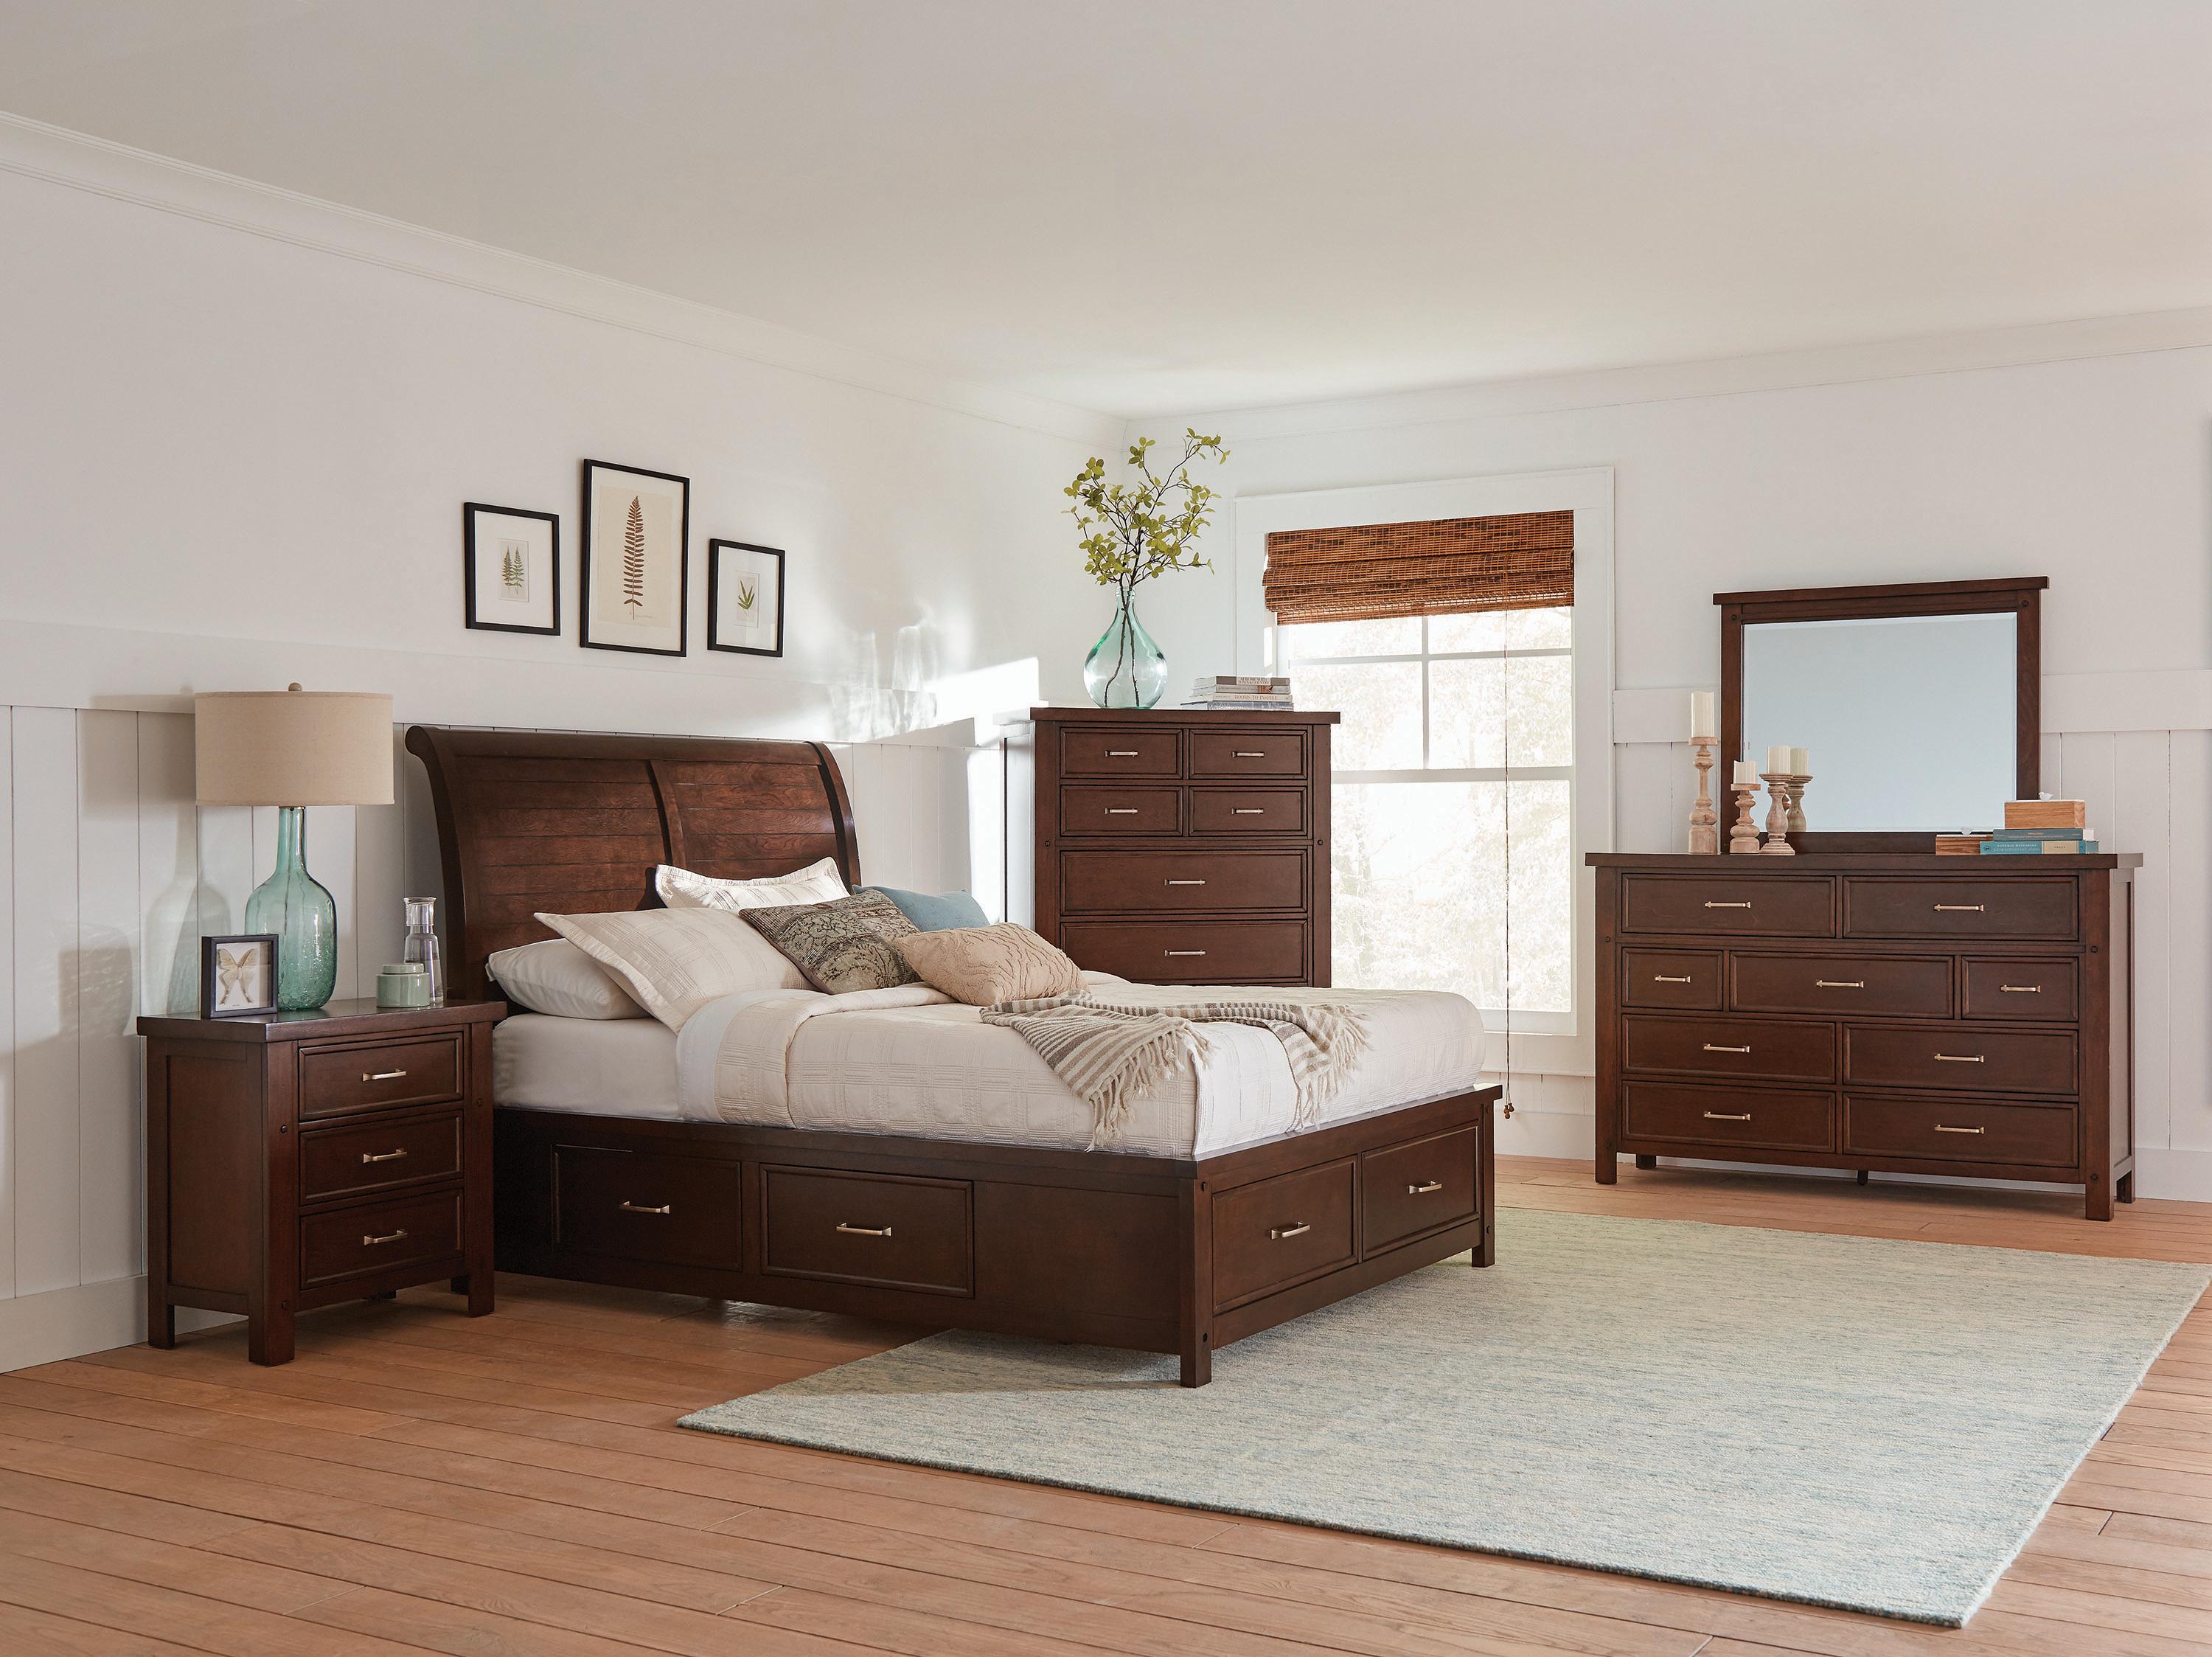 Transitional Bedroom Set 206430Q-3PC Barstow 206430Q-3PC in Dark Cherry 